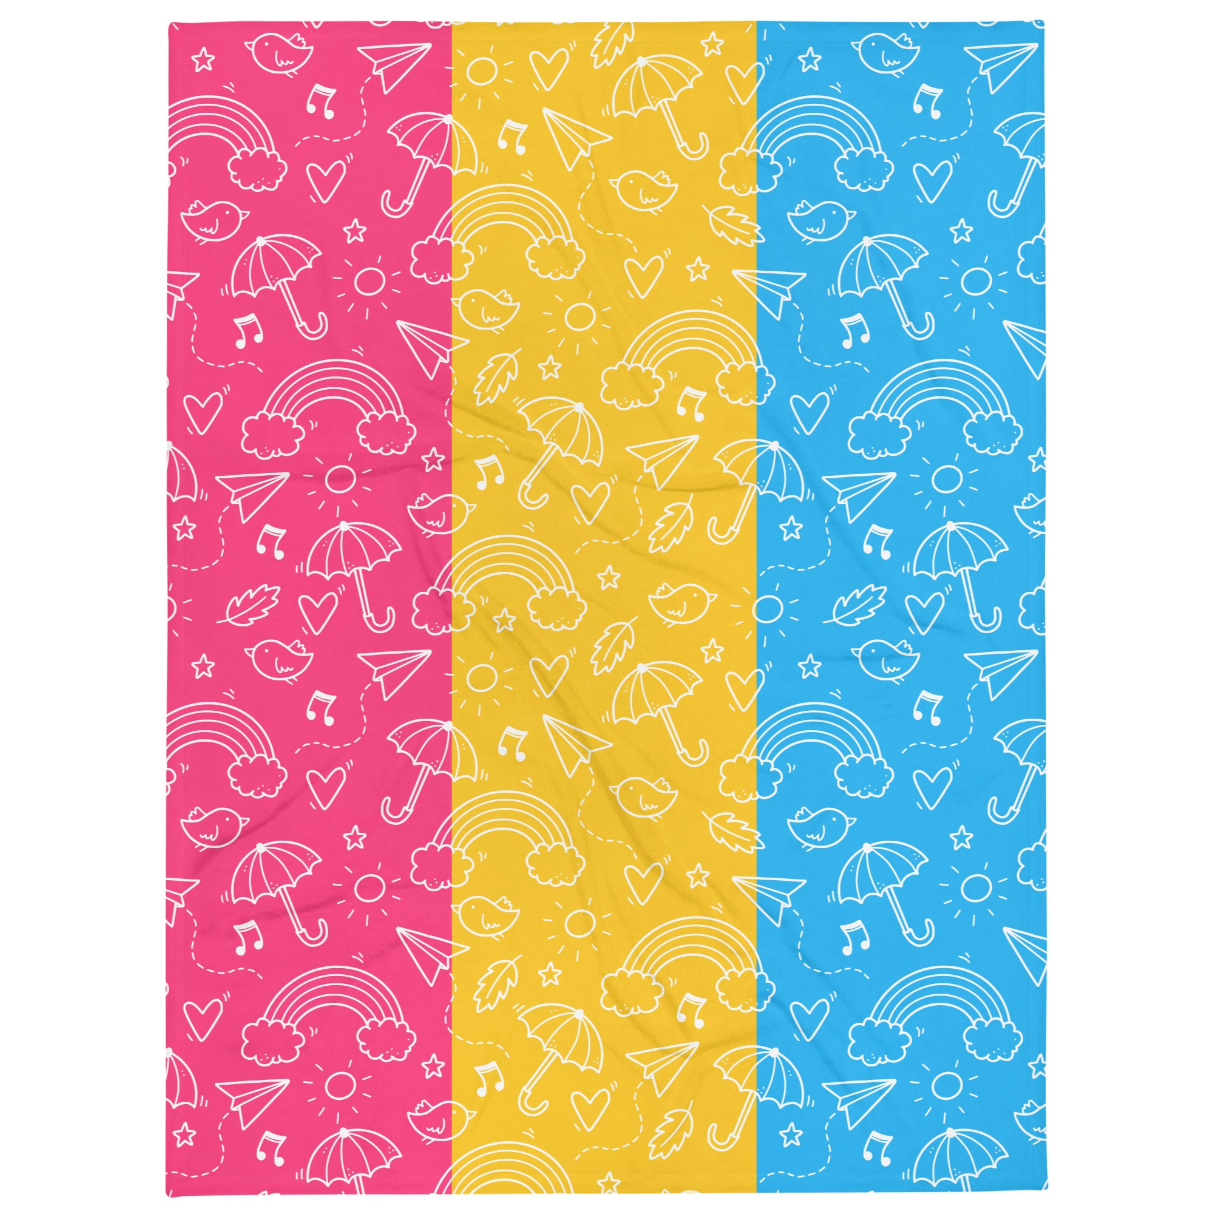 Soft throw blanket. Pansexual pride flag colors with cute lgbtq doodle print